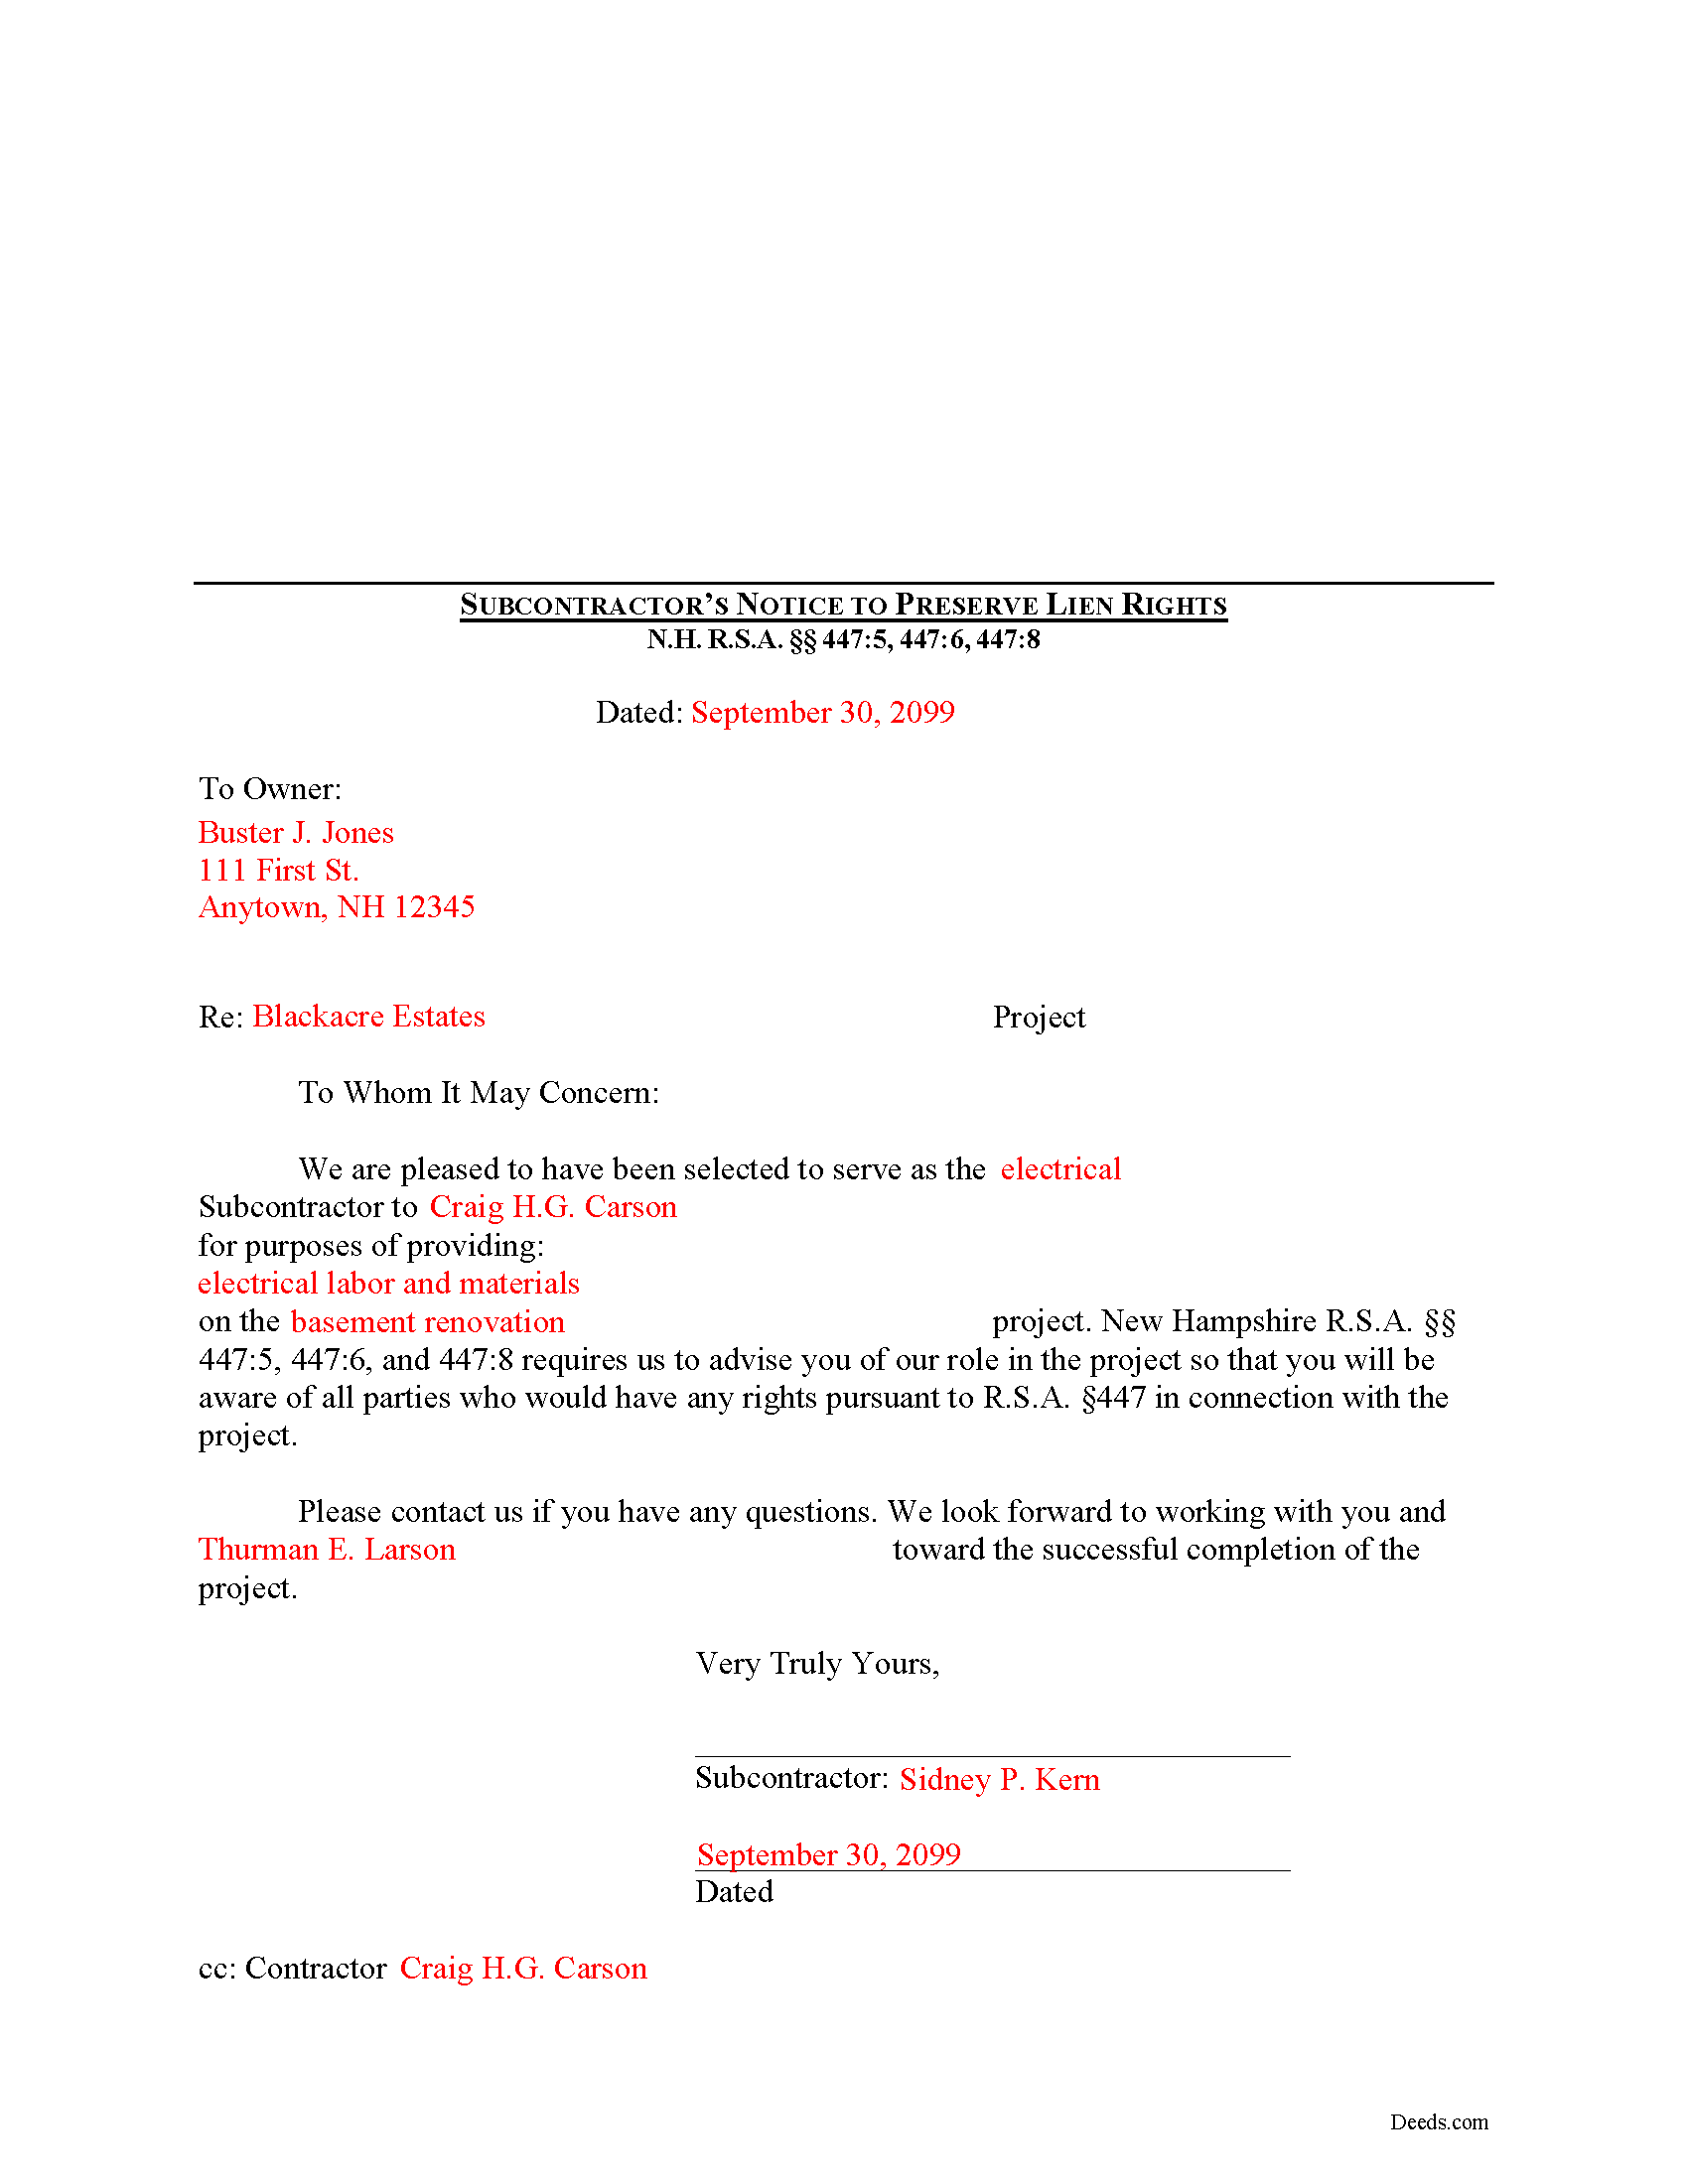 Completed Example of the Subcontractor Notice Document